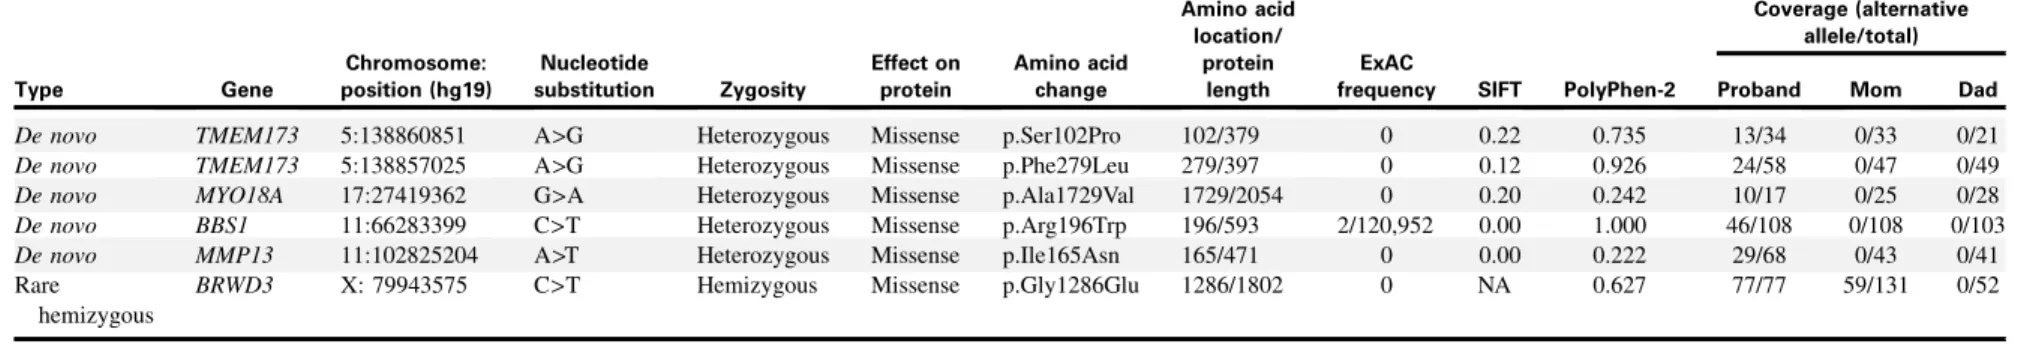 TABLE E2. Protein-altering, rare, and patient-specific variants Type Gene Chromosome: position (hg19) Nucleotide substitution Zygosity Effect onprotein Amino acidchange Amino acidlocation/proteinlength ExAC